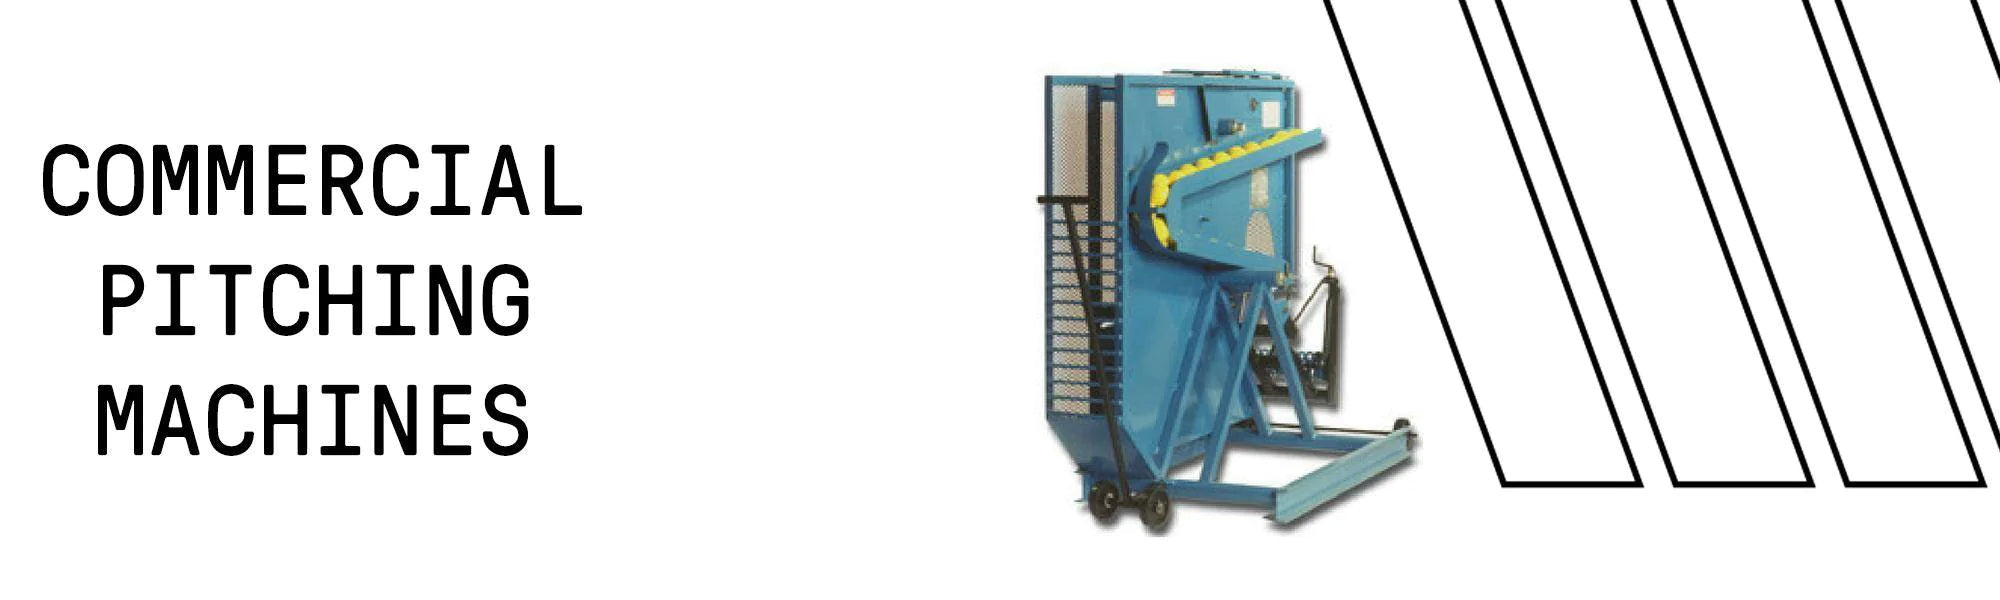 Commercial Pitching Machines